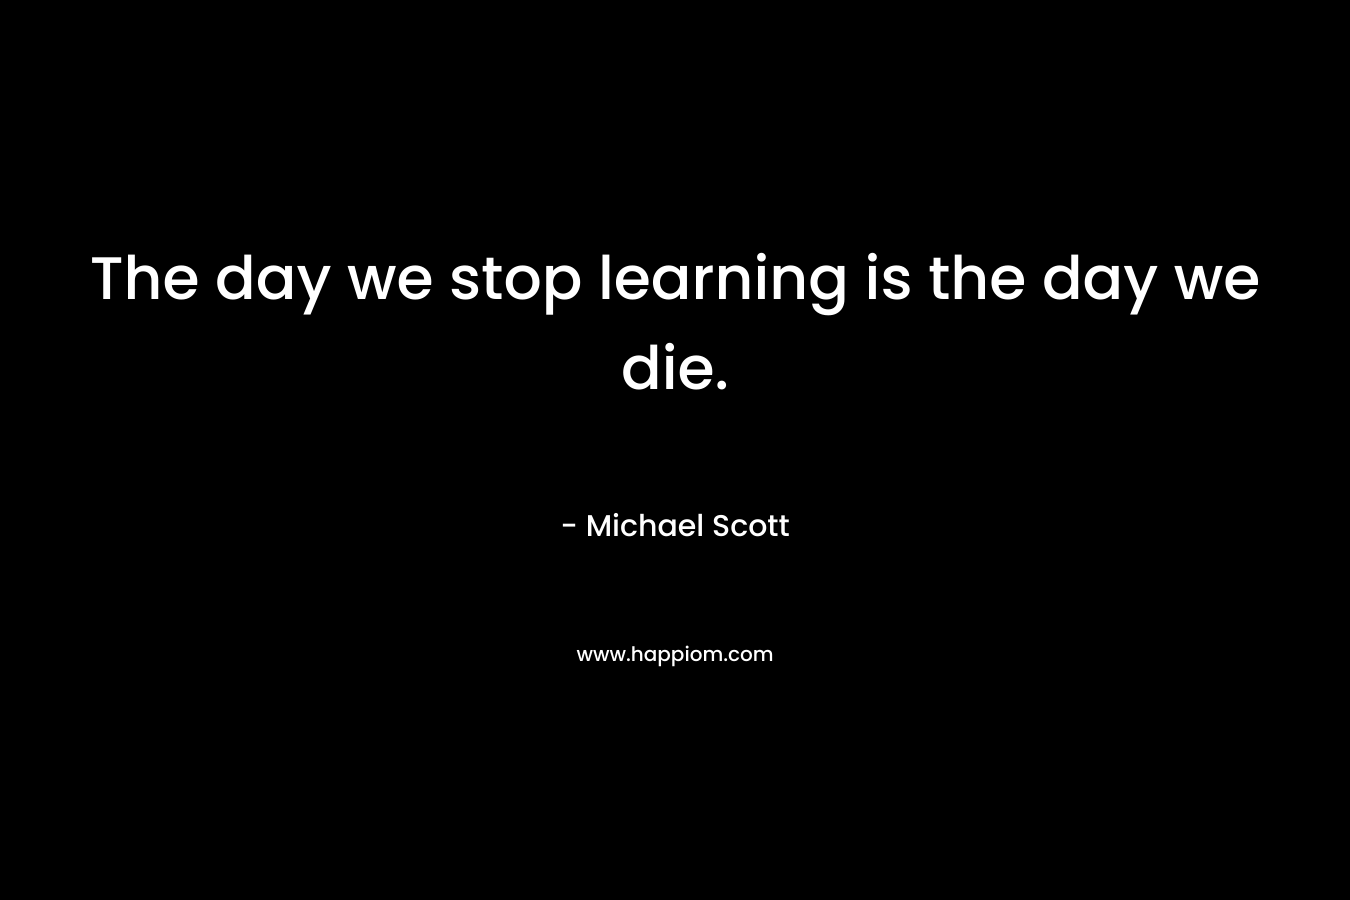 The day we stop learning is the day we die. – Michael Scott